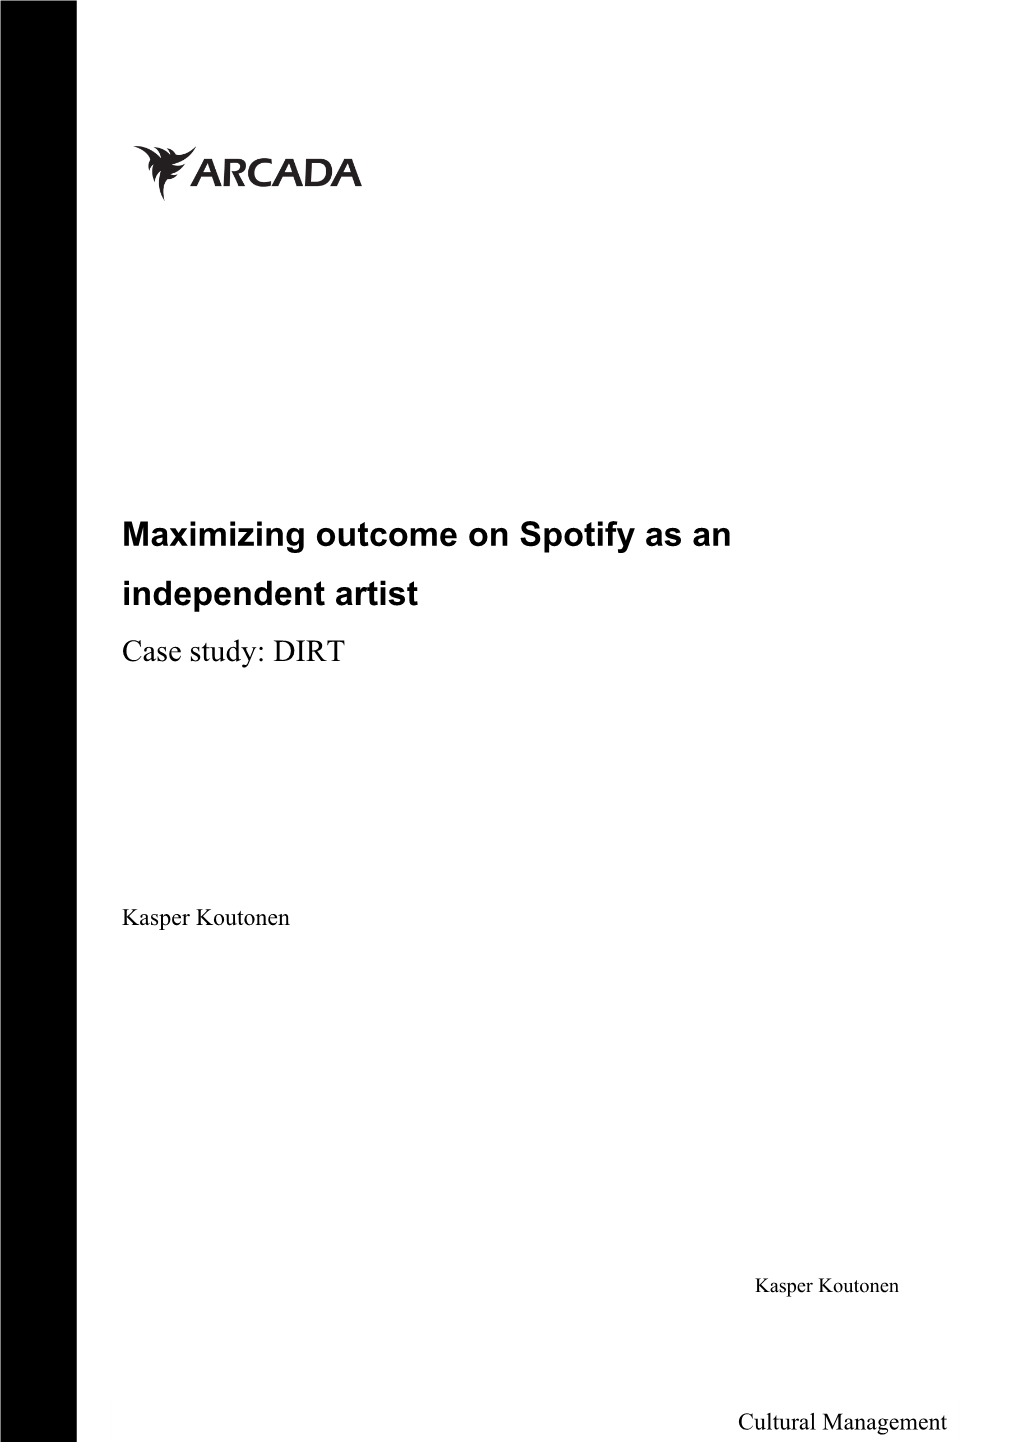 Maximizing Outcome on Spotify As an Independent Artist Case Study: DIRT